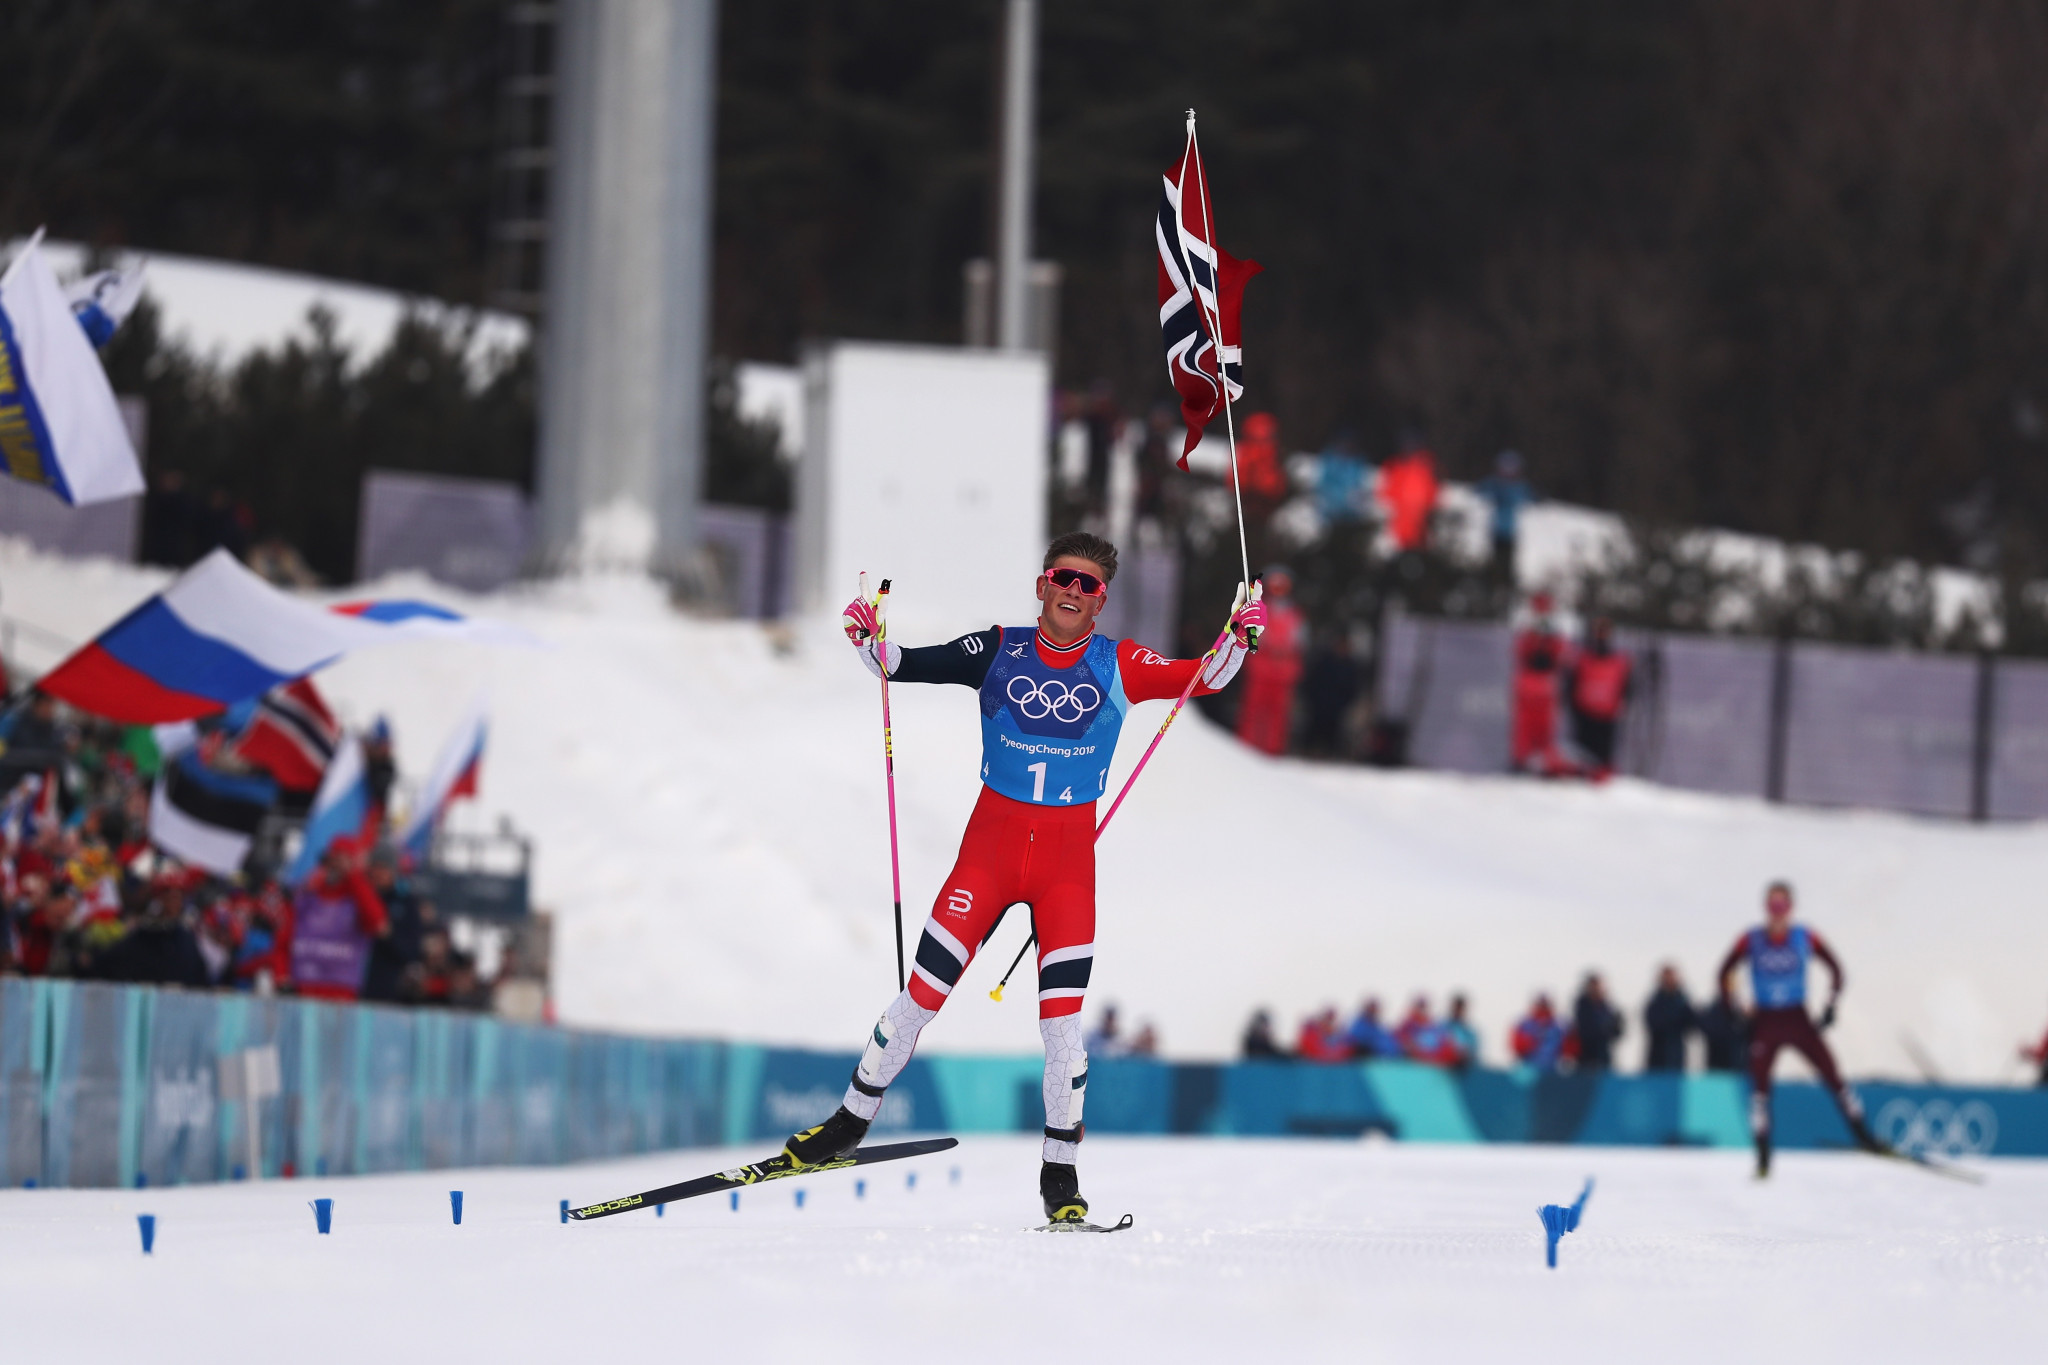 Johannes Høsflot Klæbo sealed Norway's victory in the men’s 4x10 kilometres relay at Pyeongchang 2018 today ©Getty Images